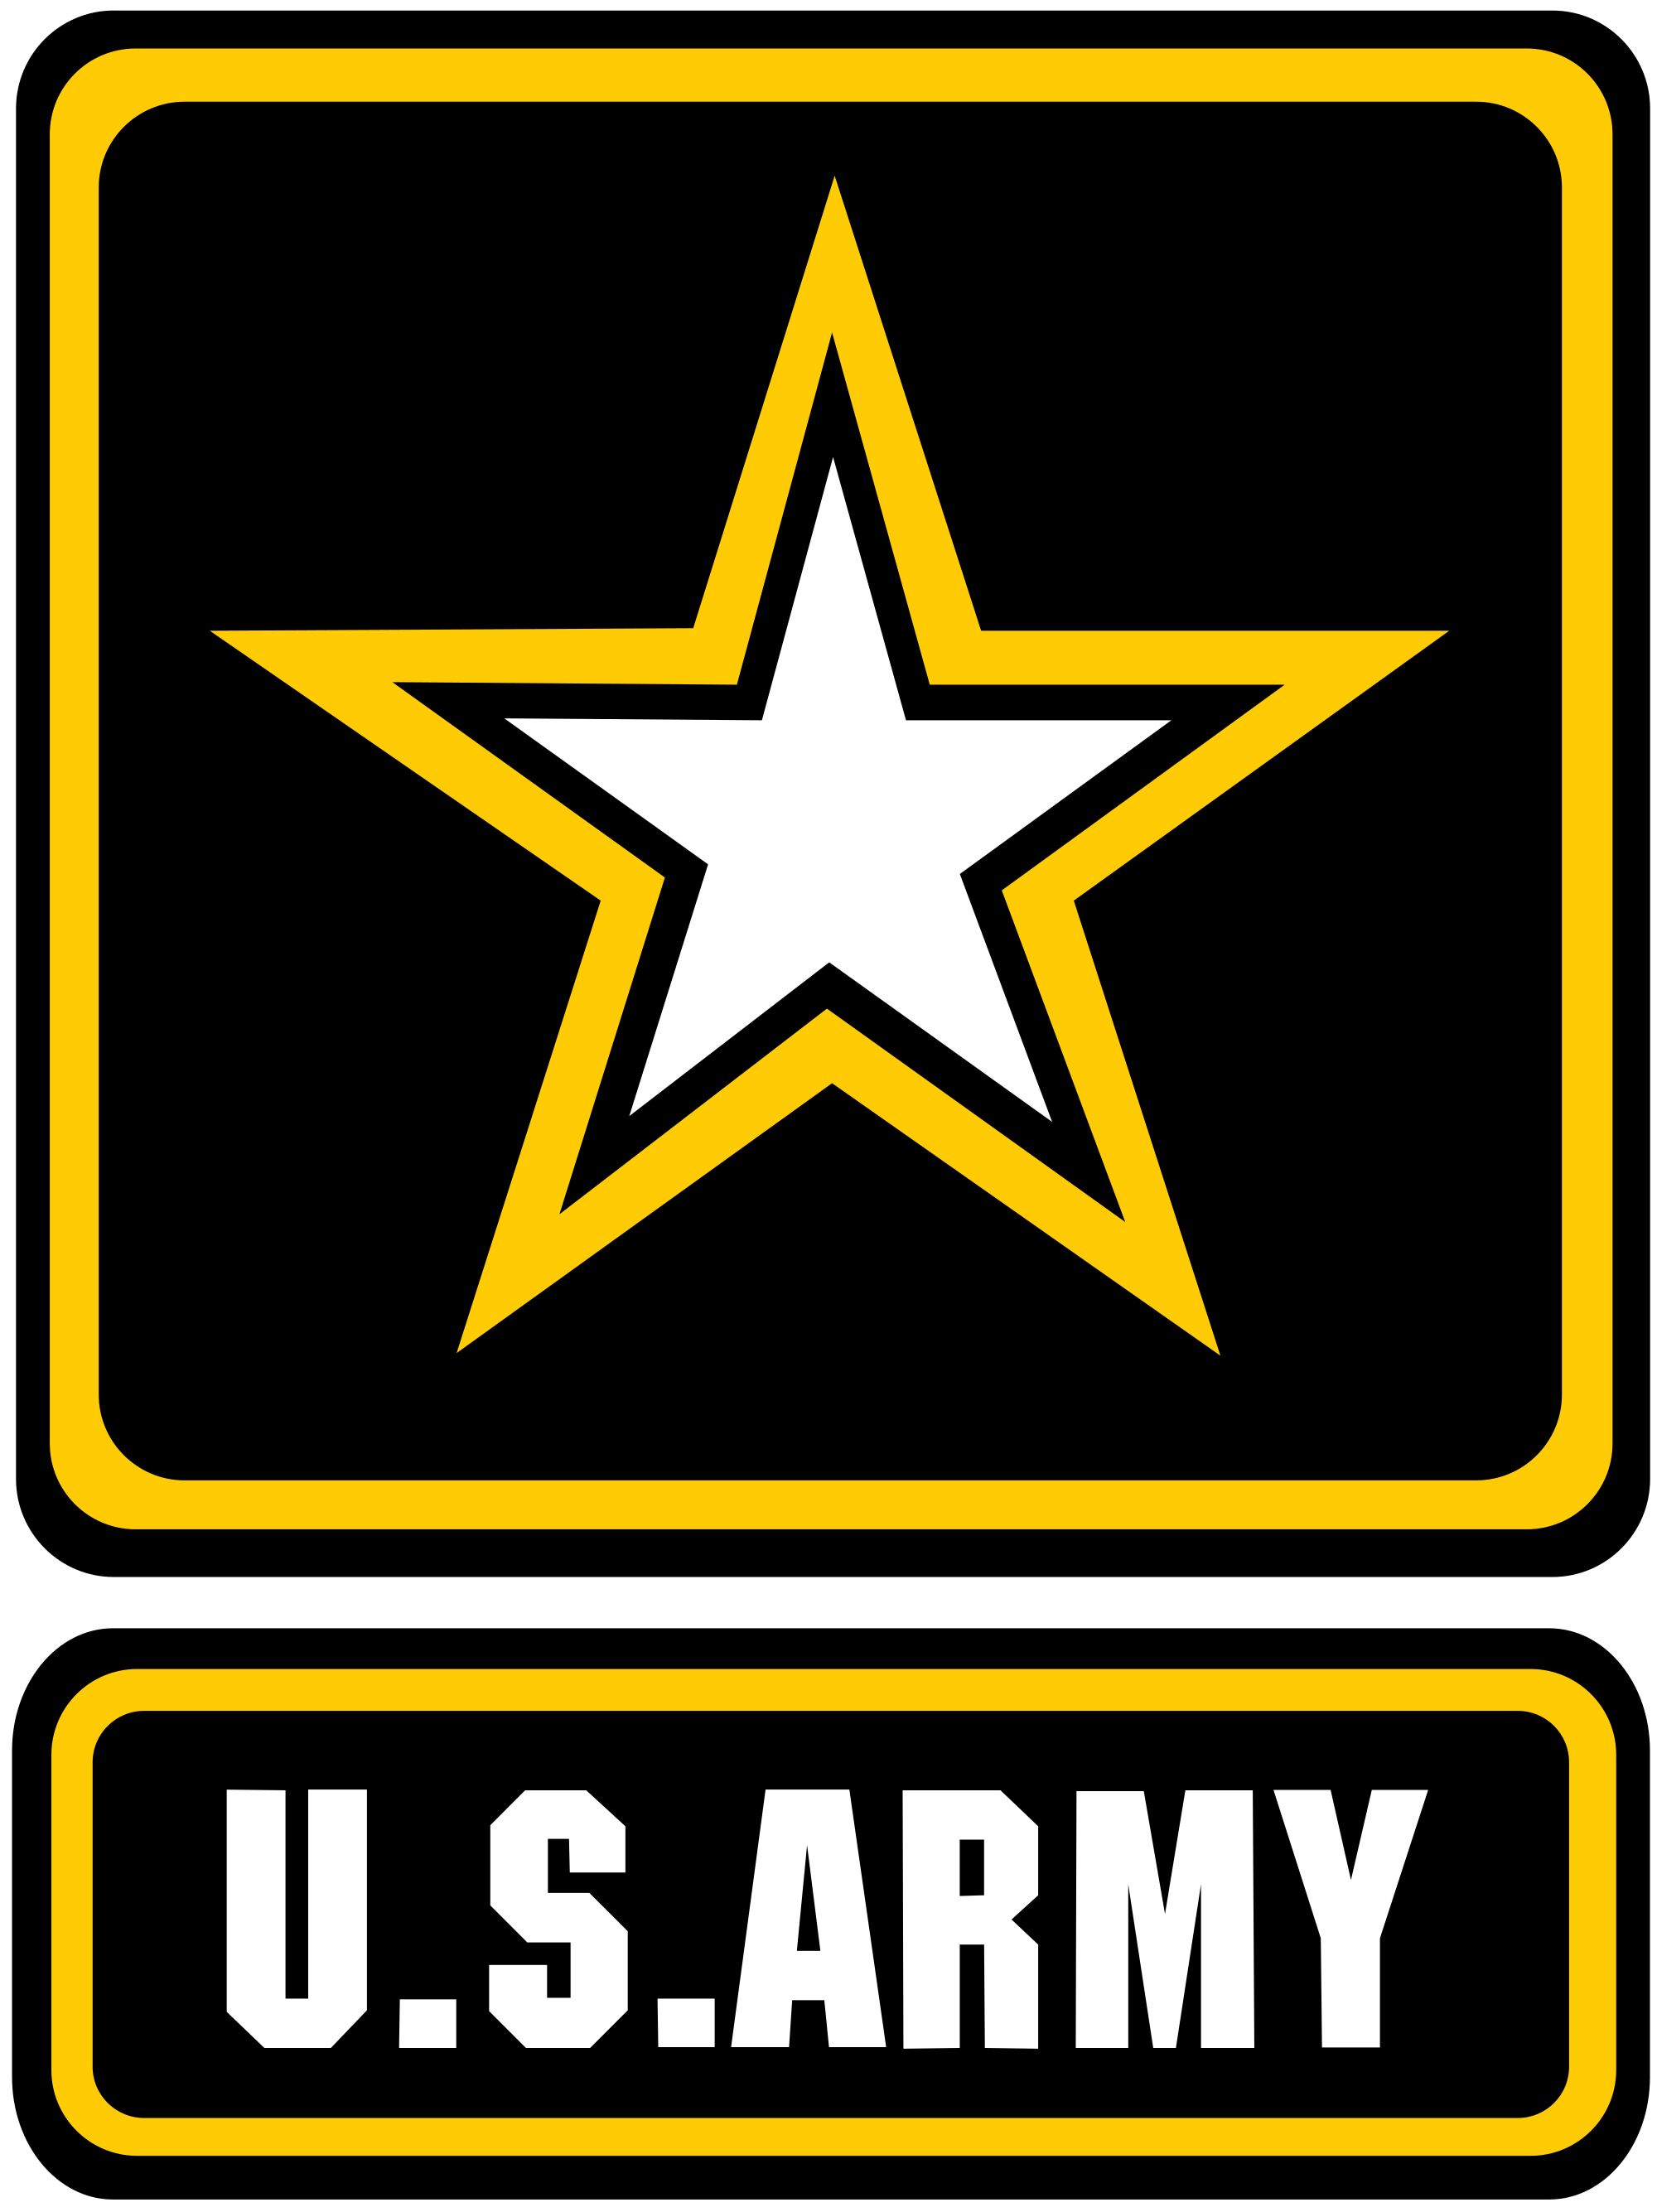 Simple Army Logo - File:US Army logo.svg - Wikimedia Commons